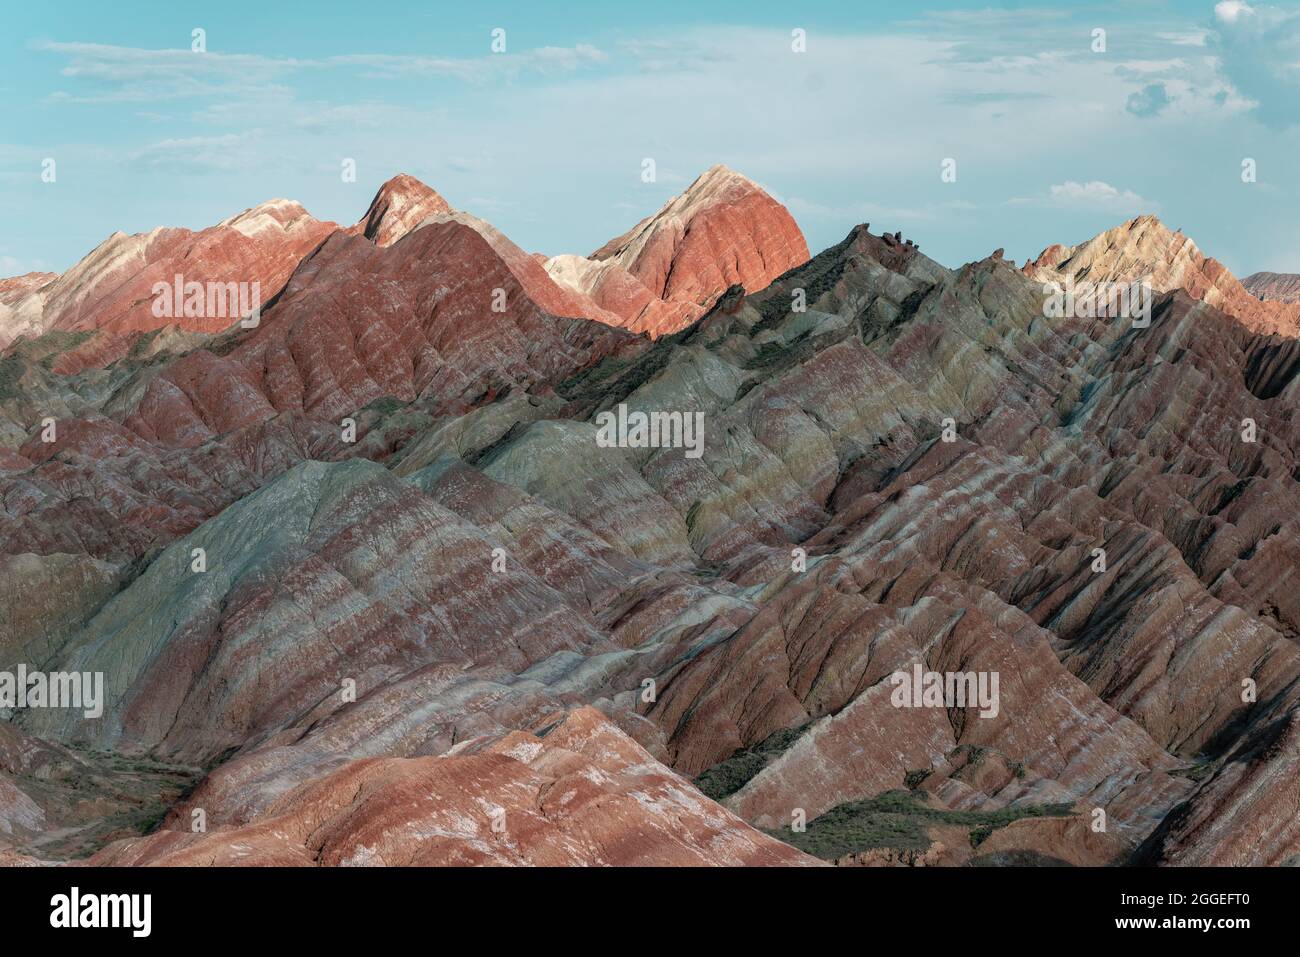 The specific landscape at Zhangye Danxia Geopark, in Gansu province, China. Stock Photo